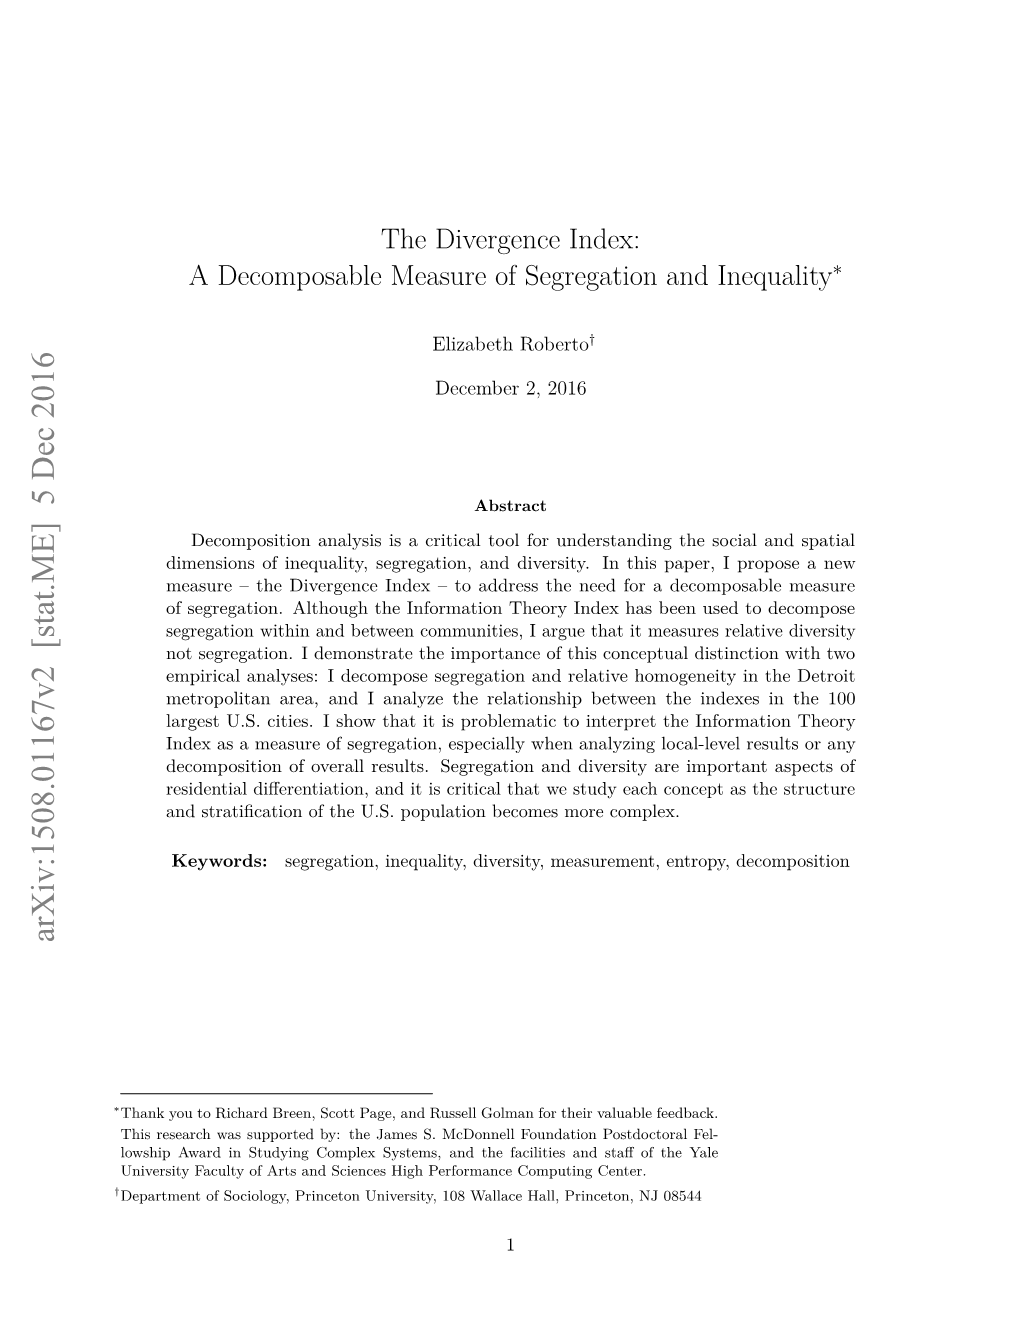 The Divergence Index: a Decomposable Measure of Segregation and Inequality∗